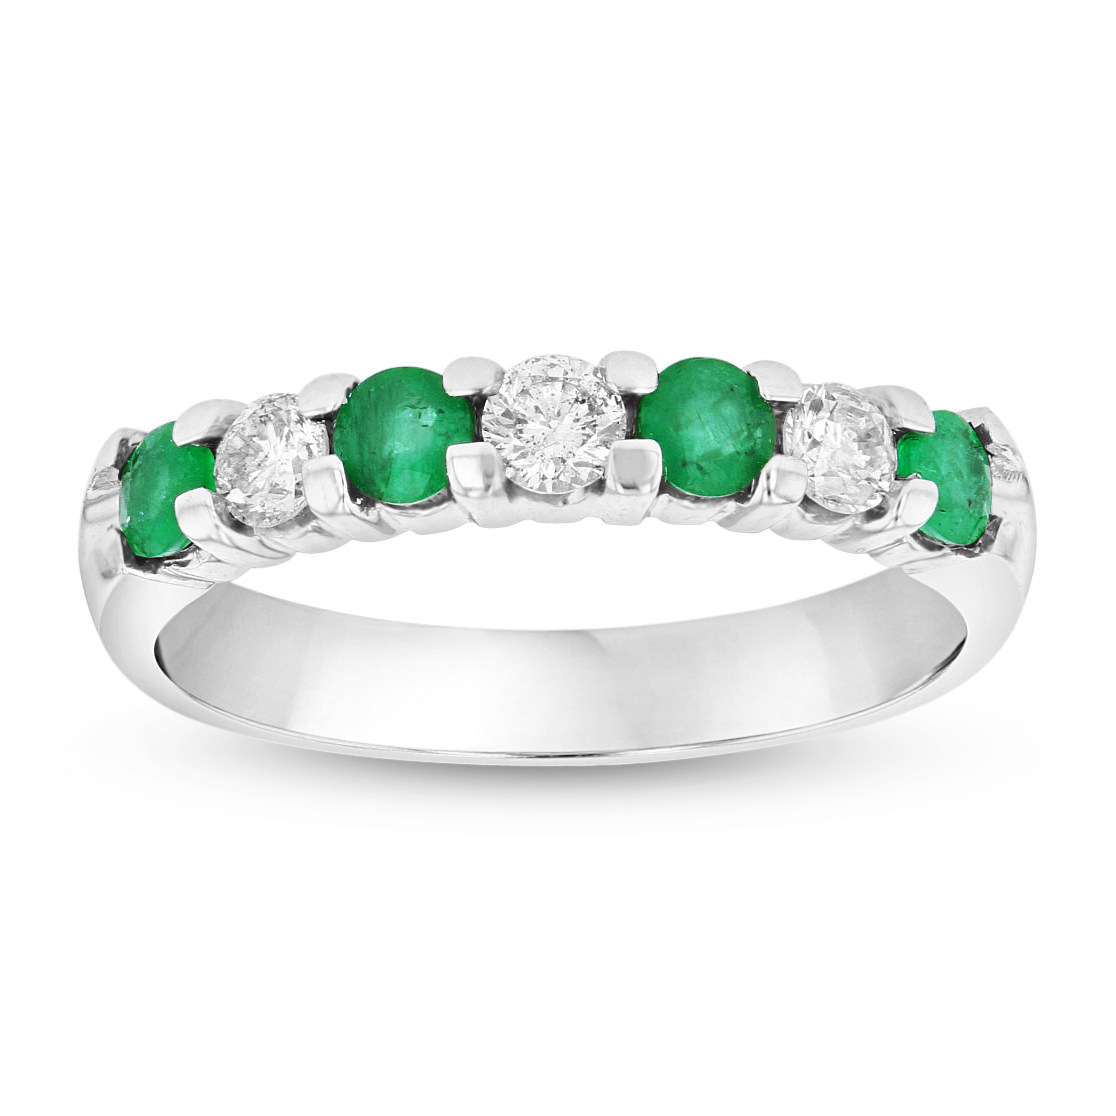 View 14K Gold Ring 0.78ct tw Round Diamonds and Emeralds Prong Set Band